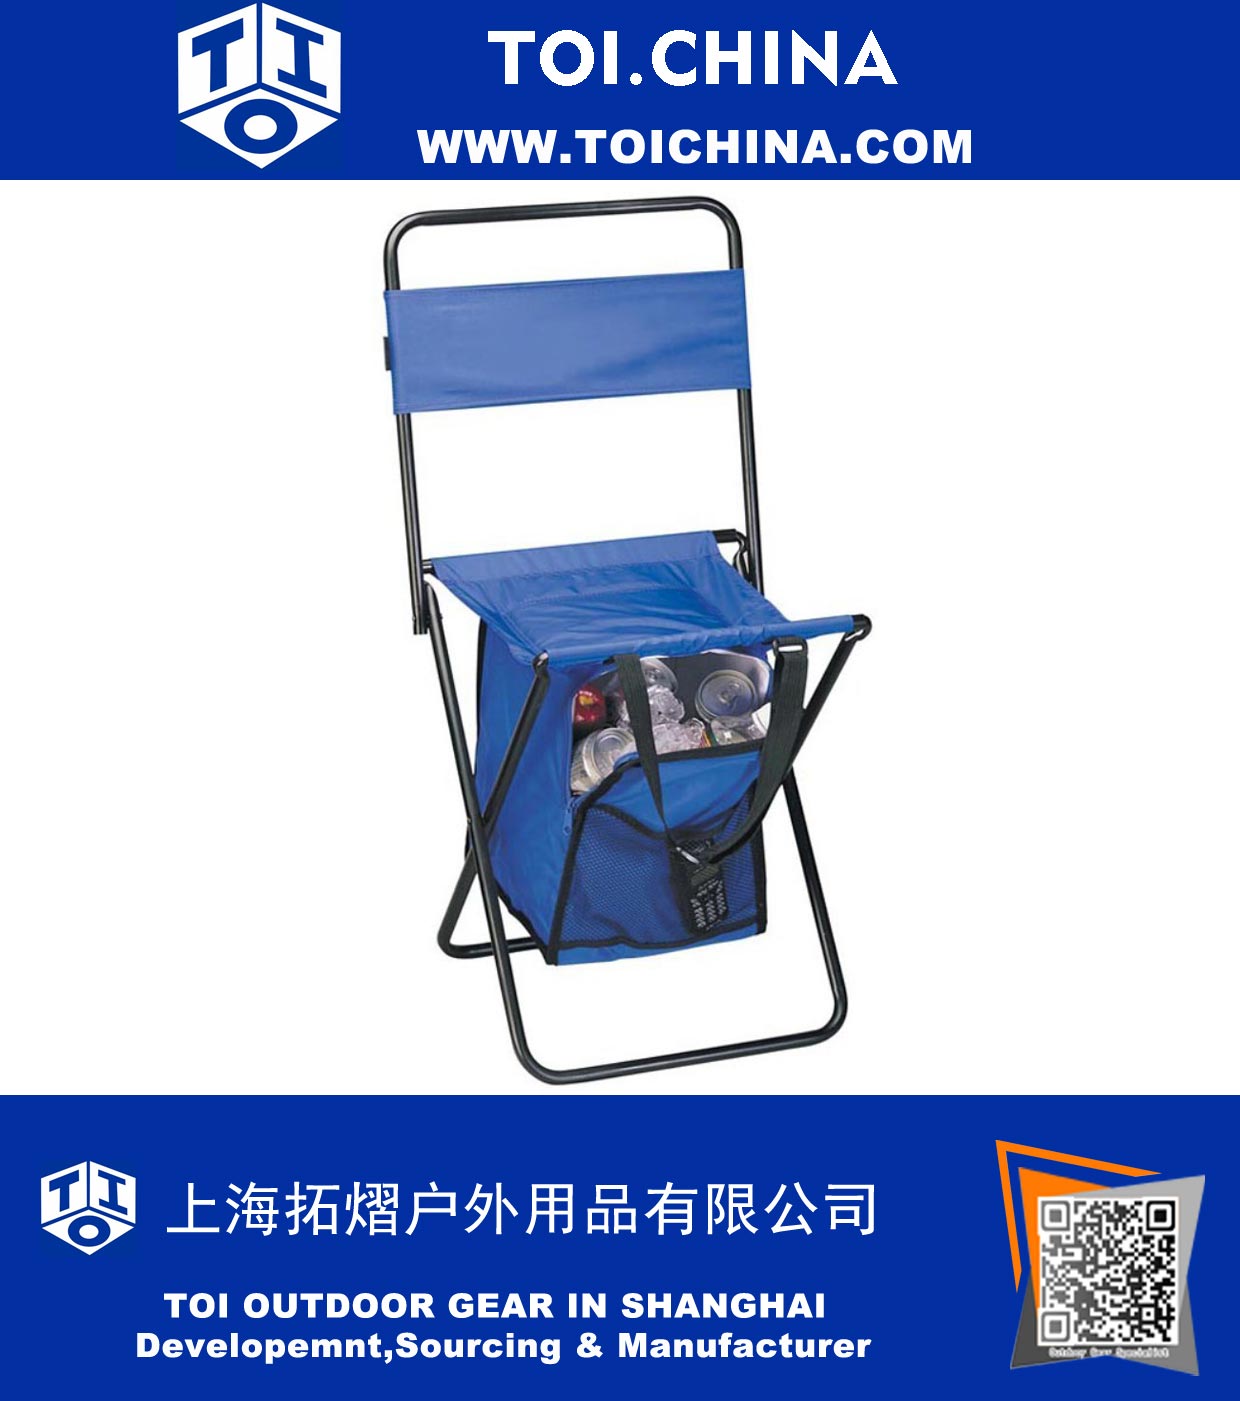 Preferred Nation Folding Chair with Cooler